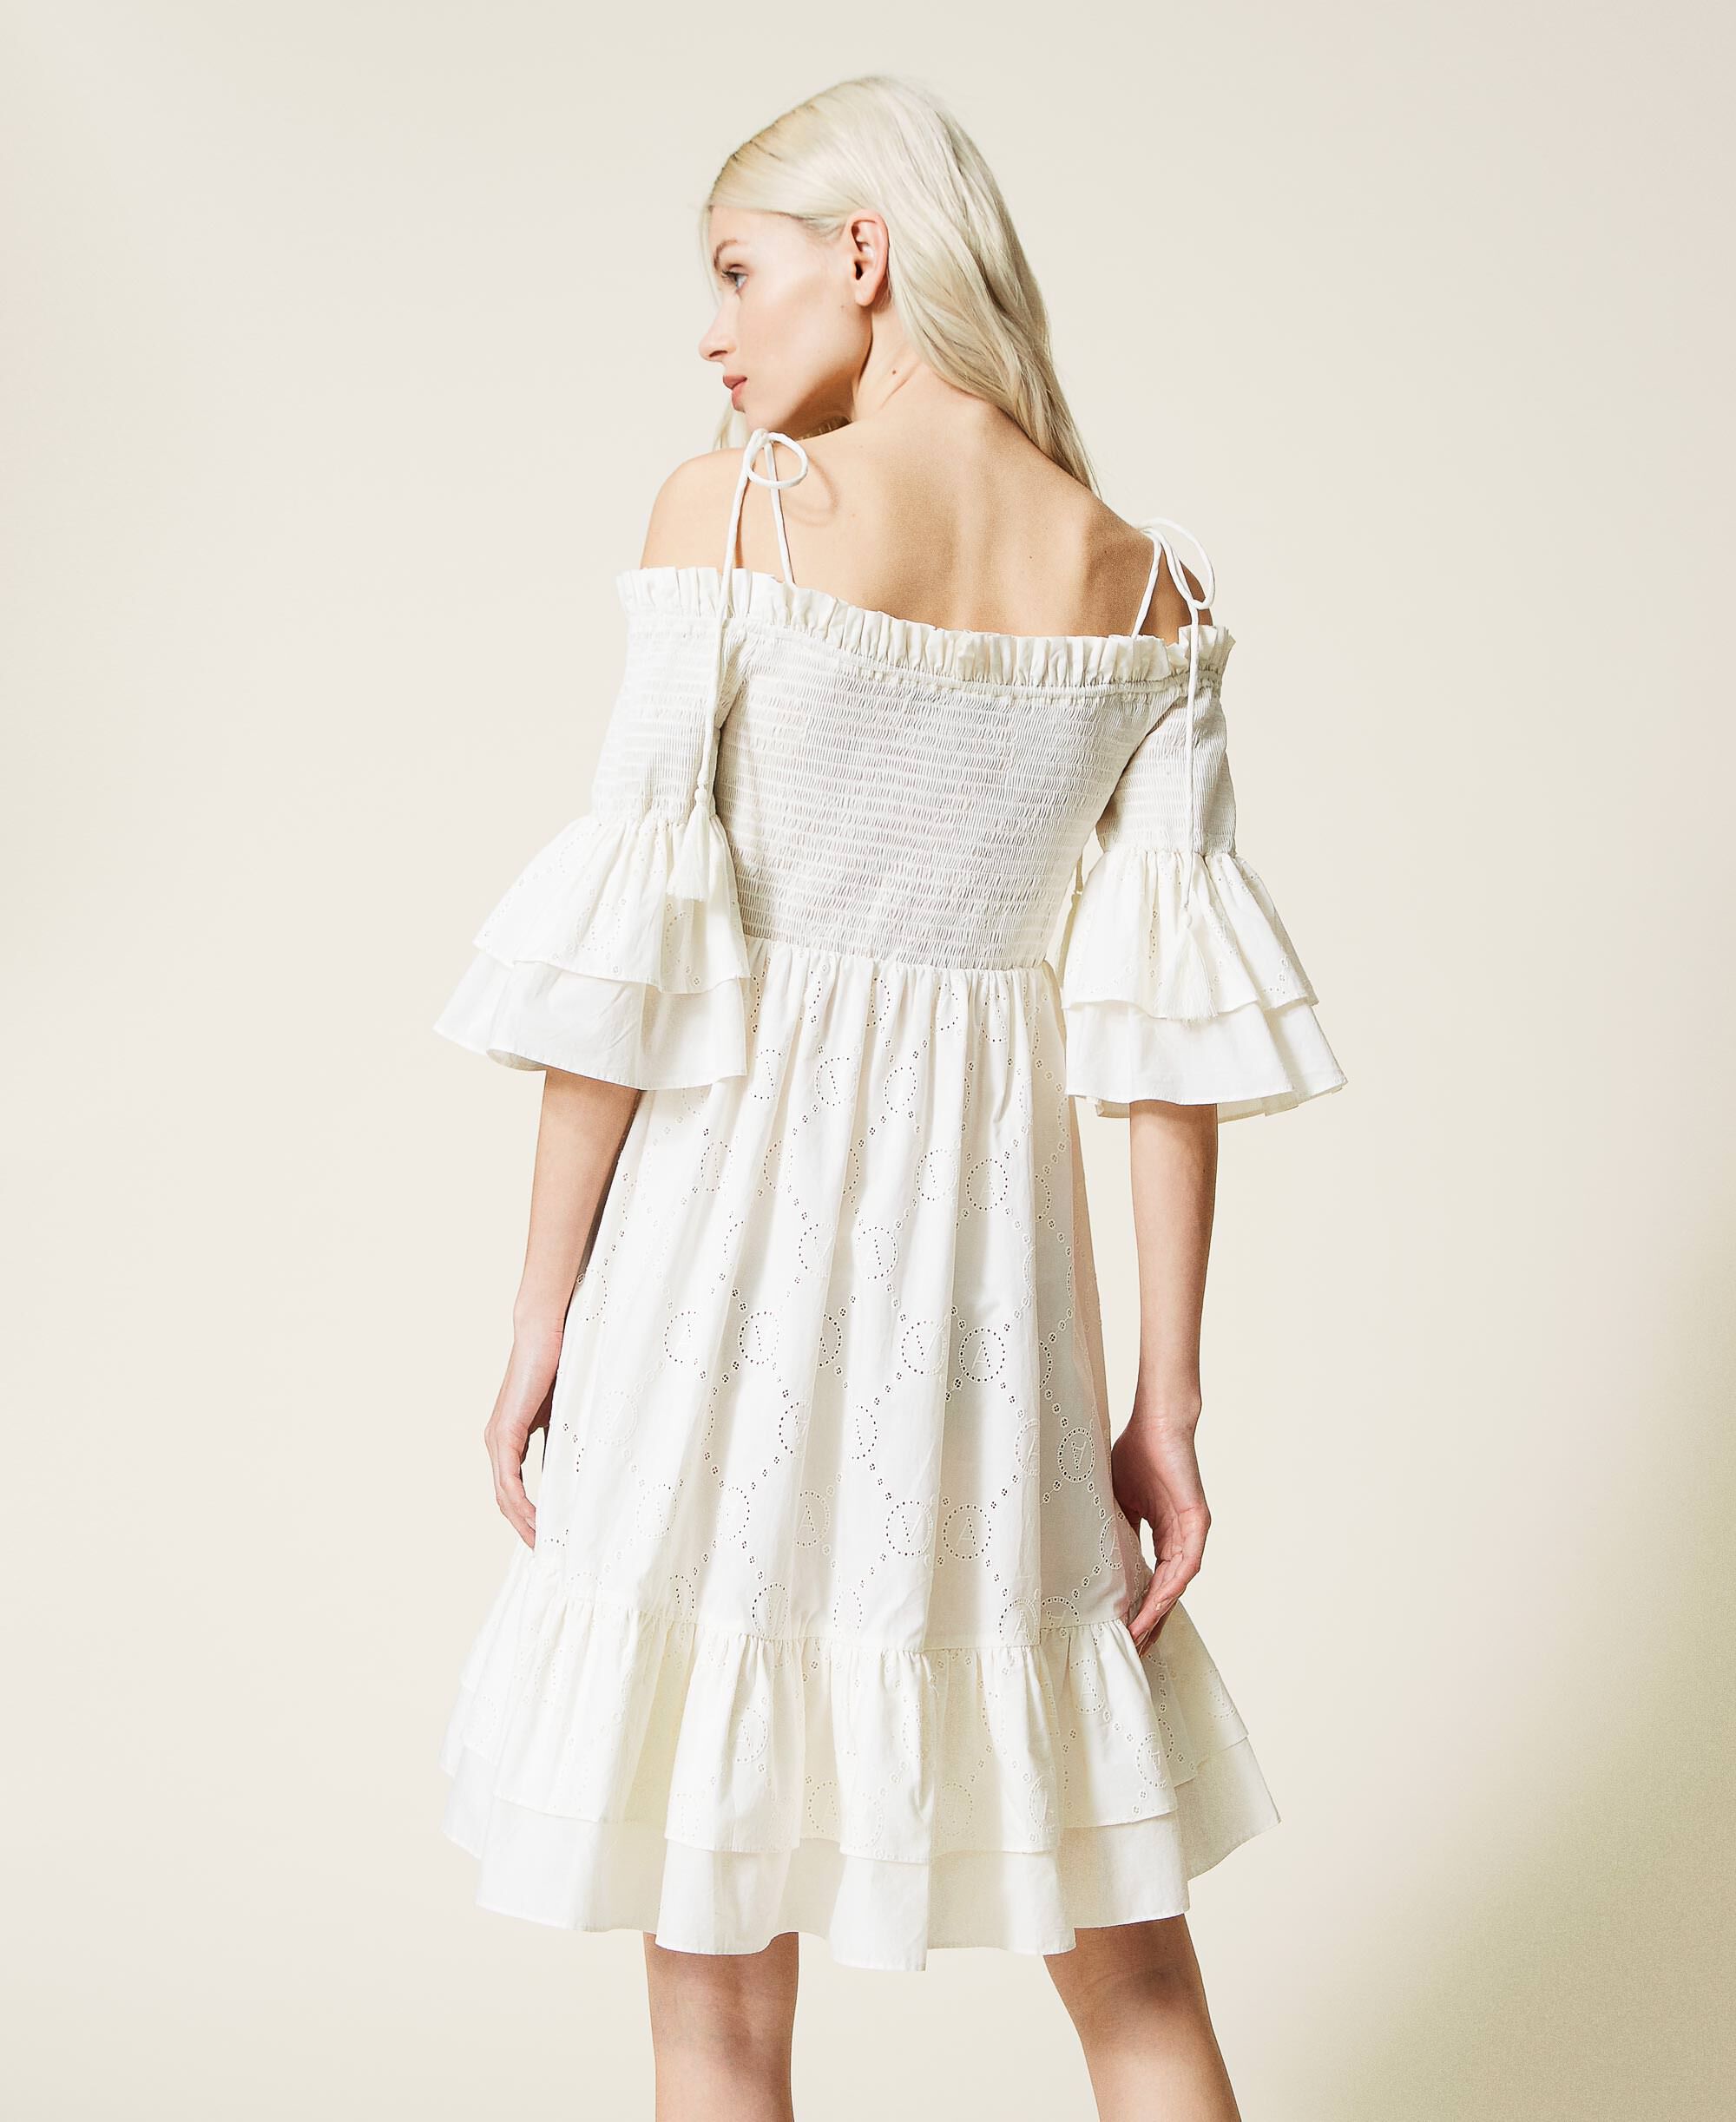 Robe Milano à bordure en broderie anglaise Farfetch Fille Vêtements Robes Broderie Anglaise 